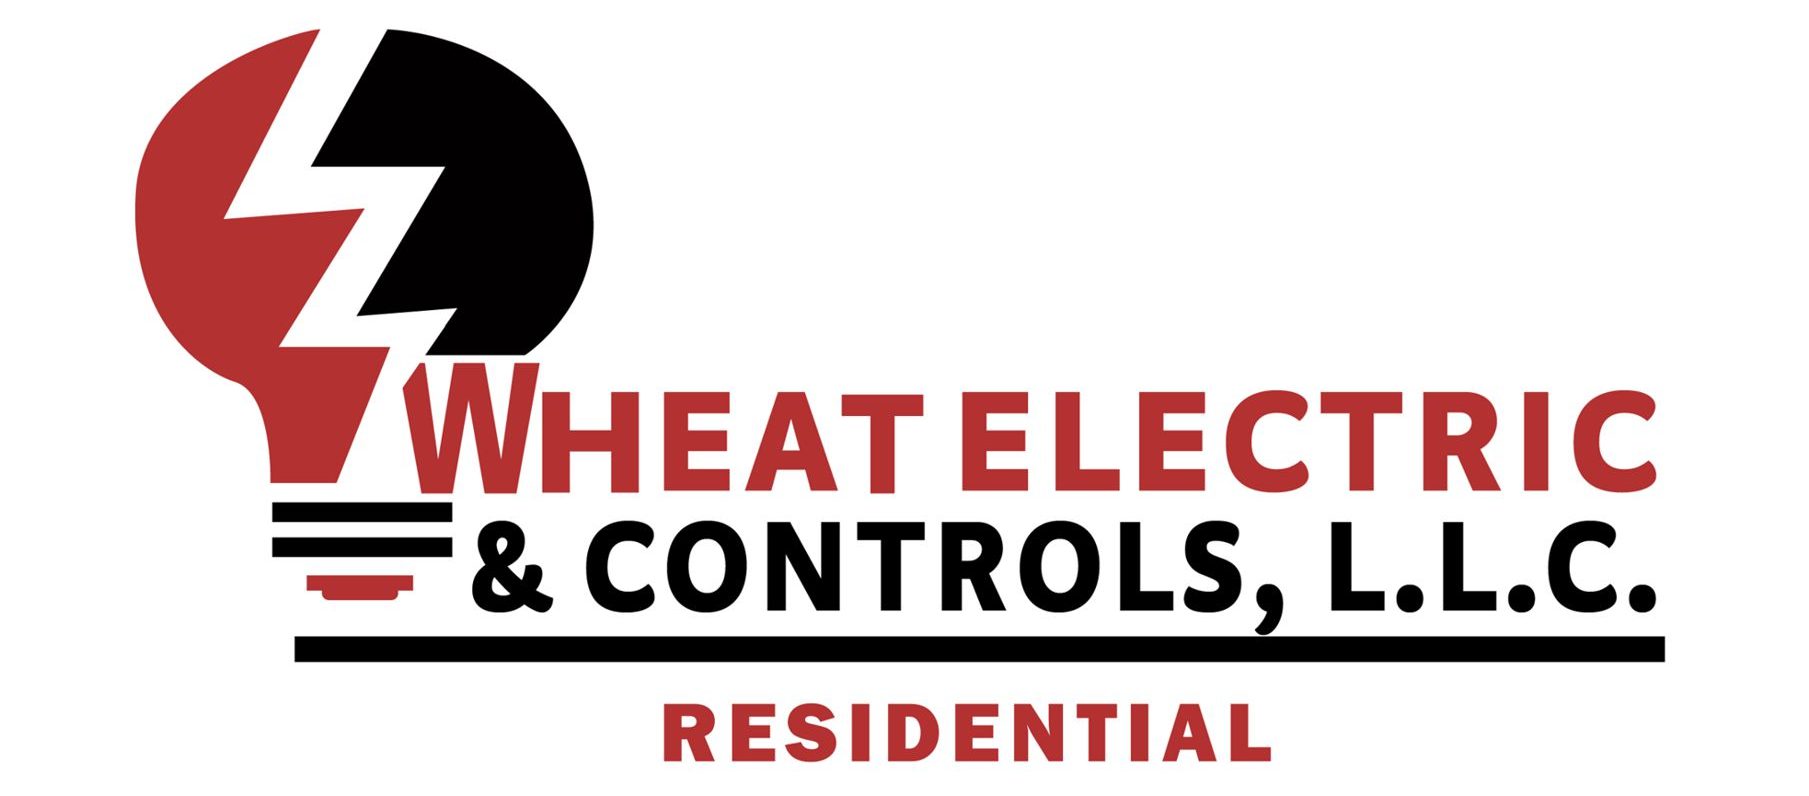 cropped Wheat Electric Residential 1800x1300 pixels